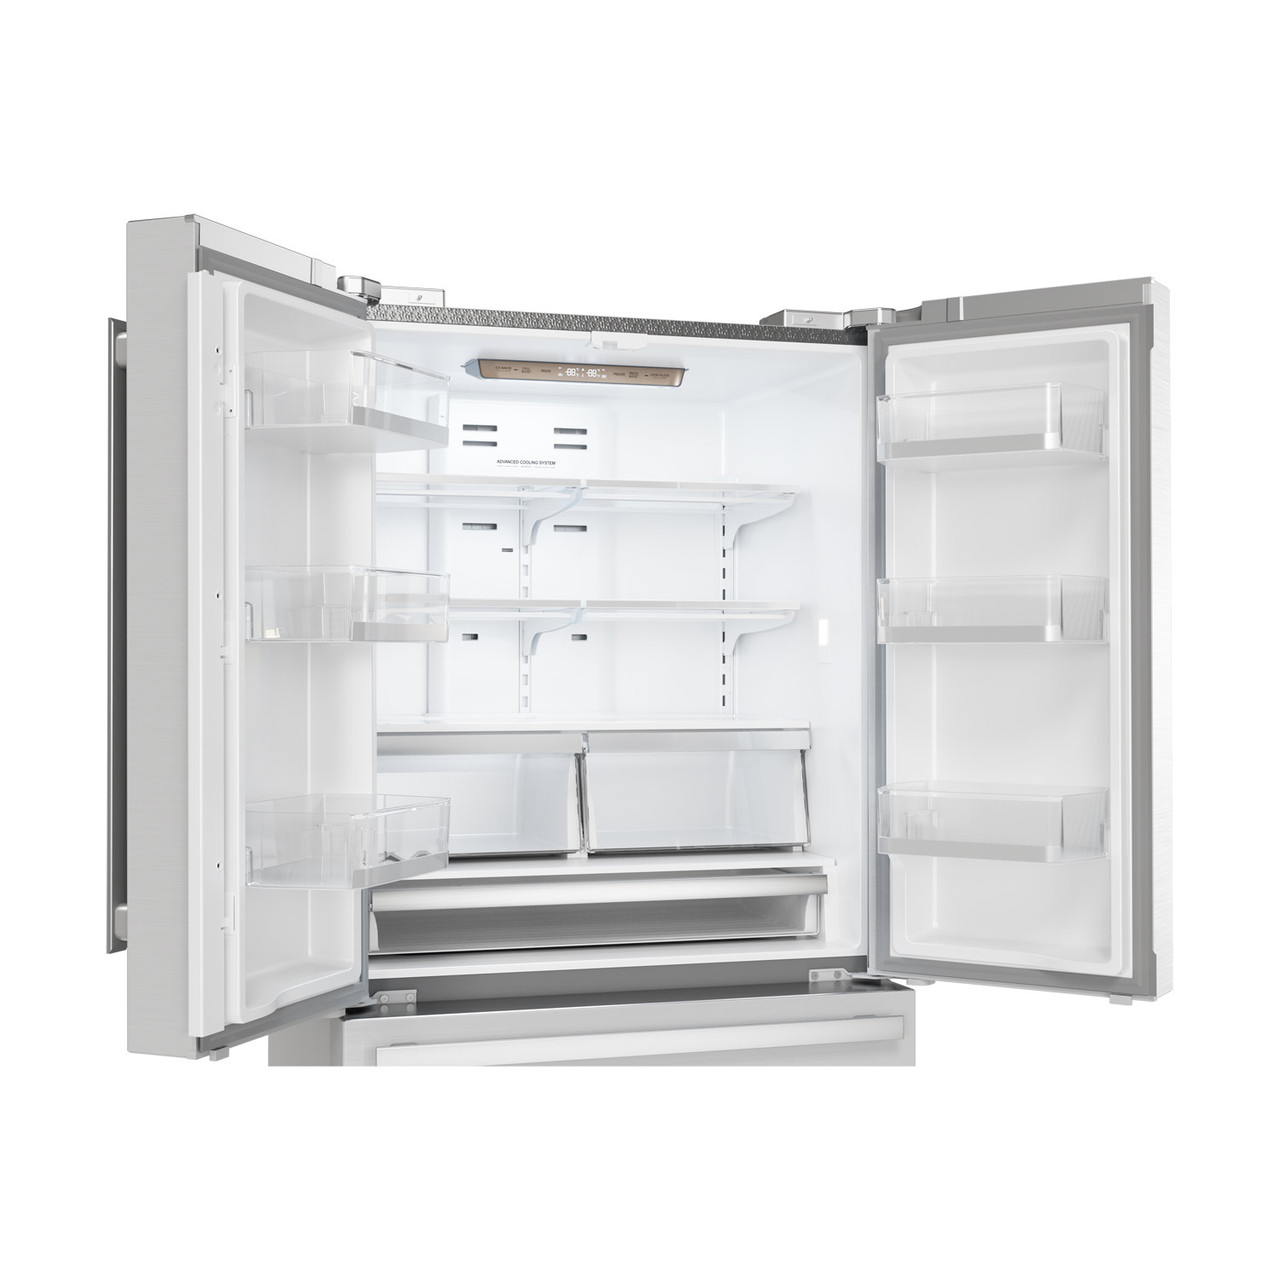 Sharp French 4-Door Counter-Depth Refrigerator (SJG2351FS) – view with doors open right angle